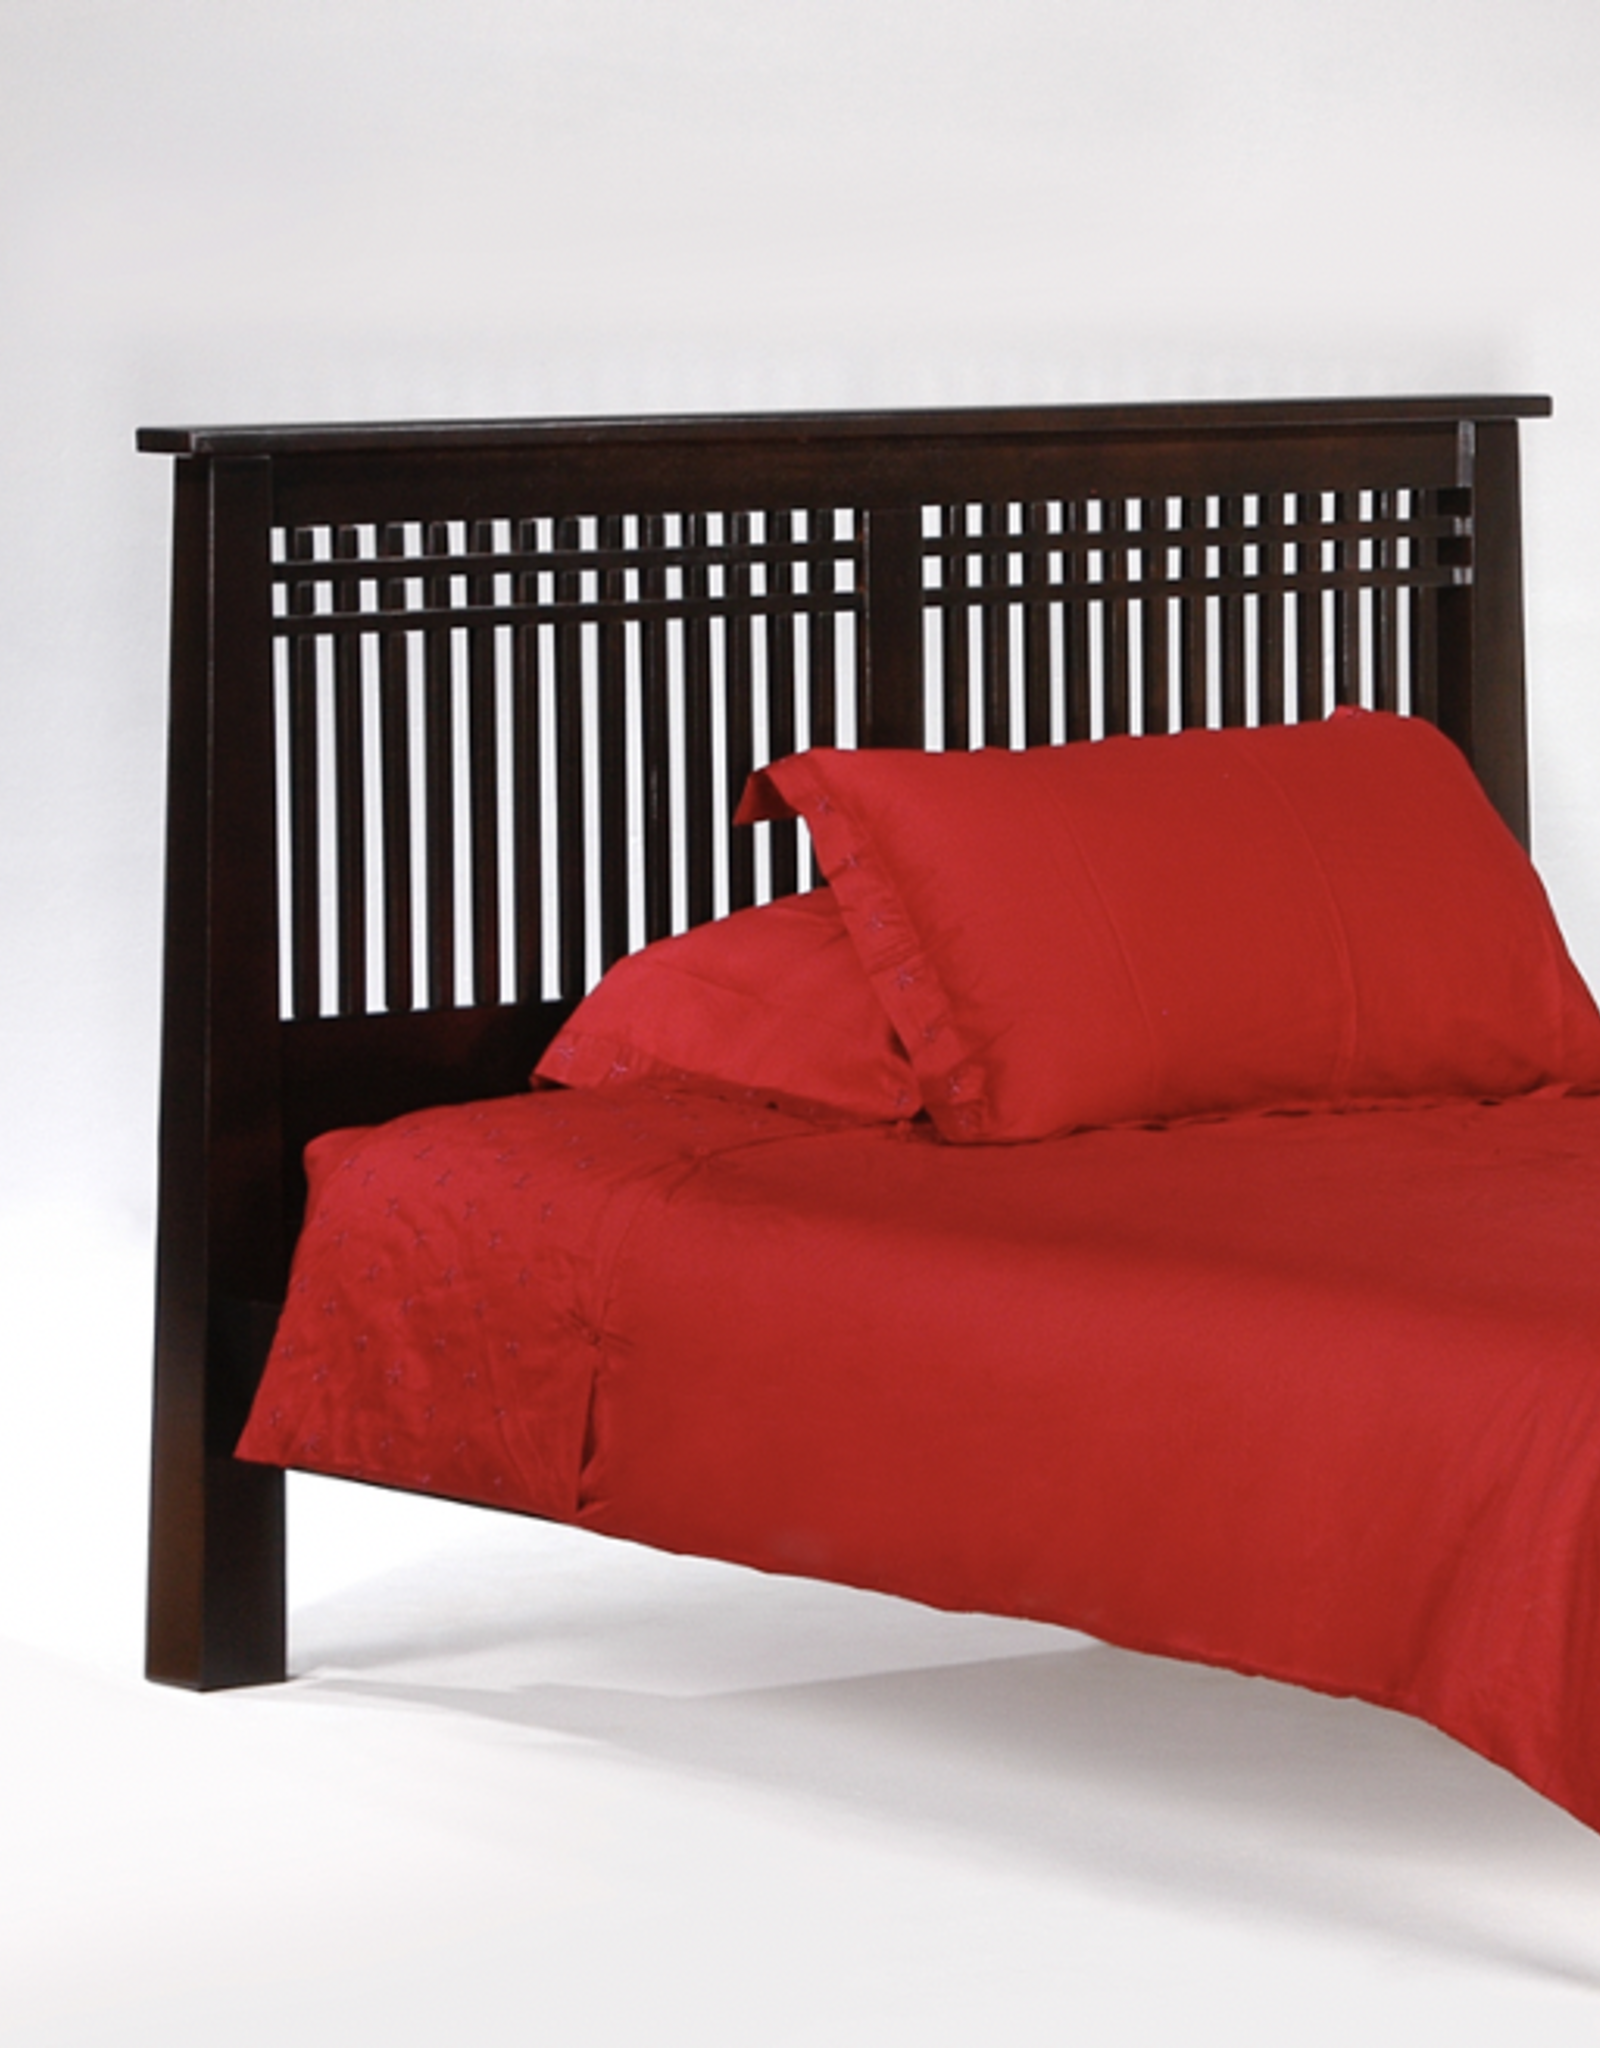 Solstice Headboard - Comes in Four Colors